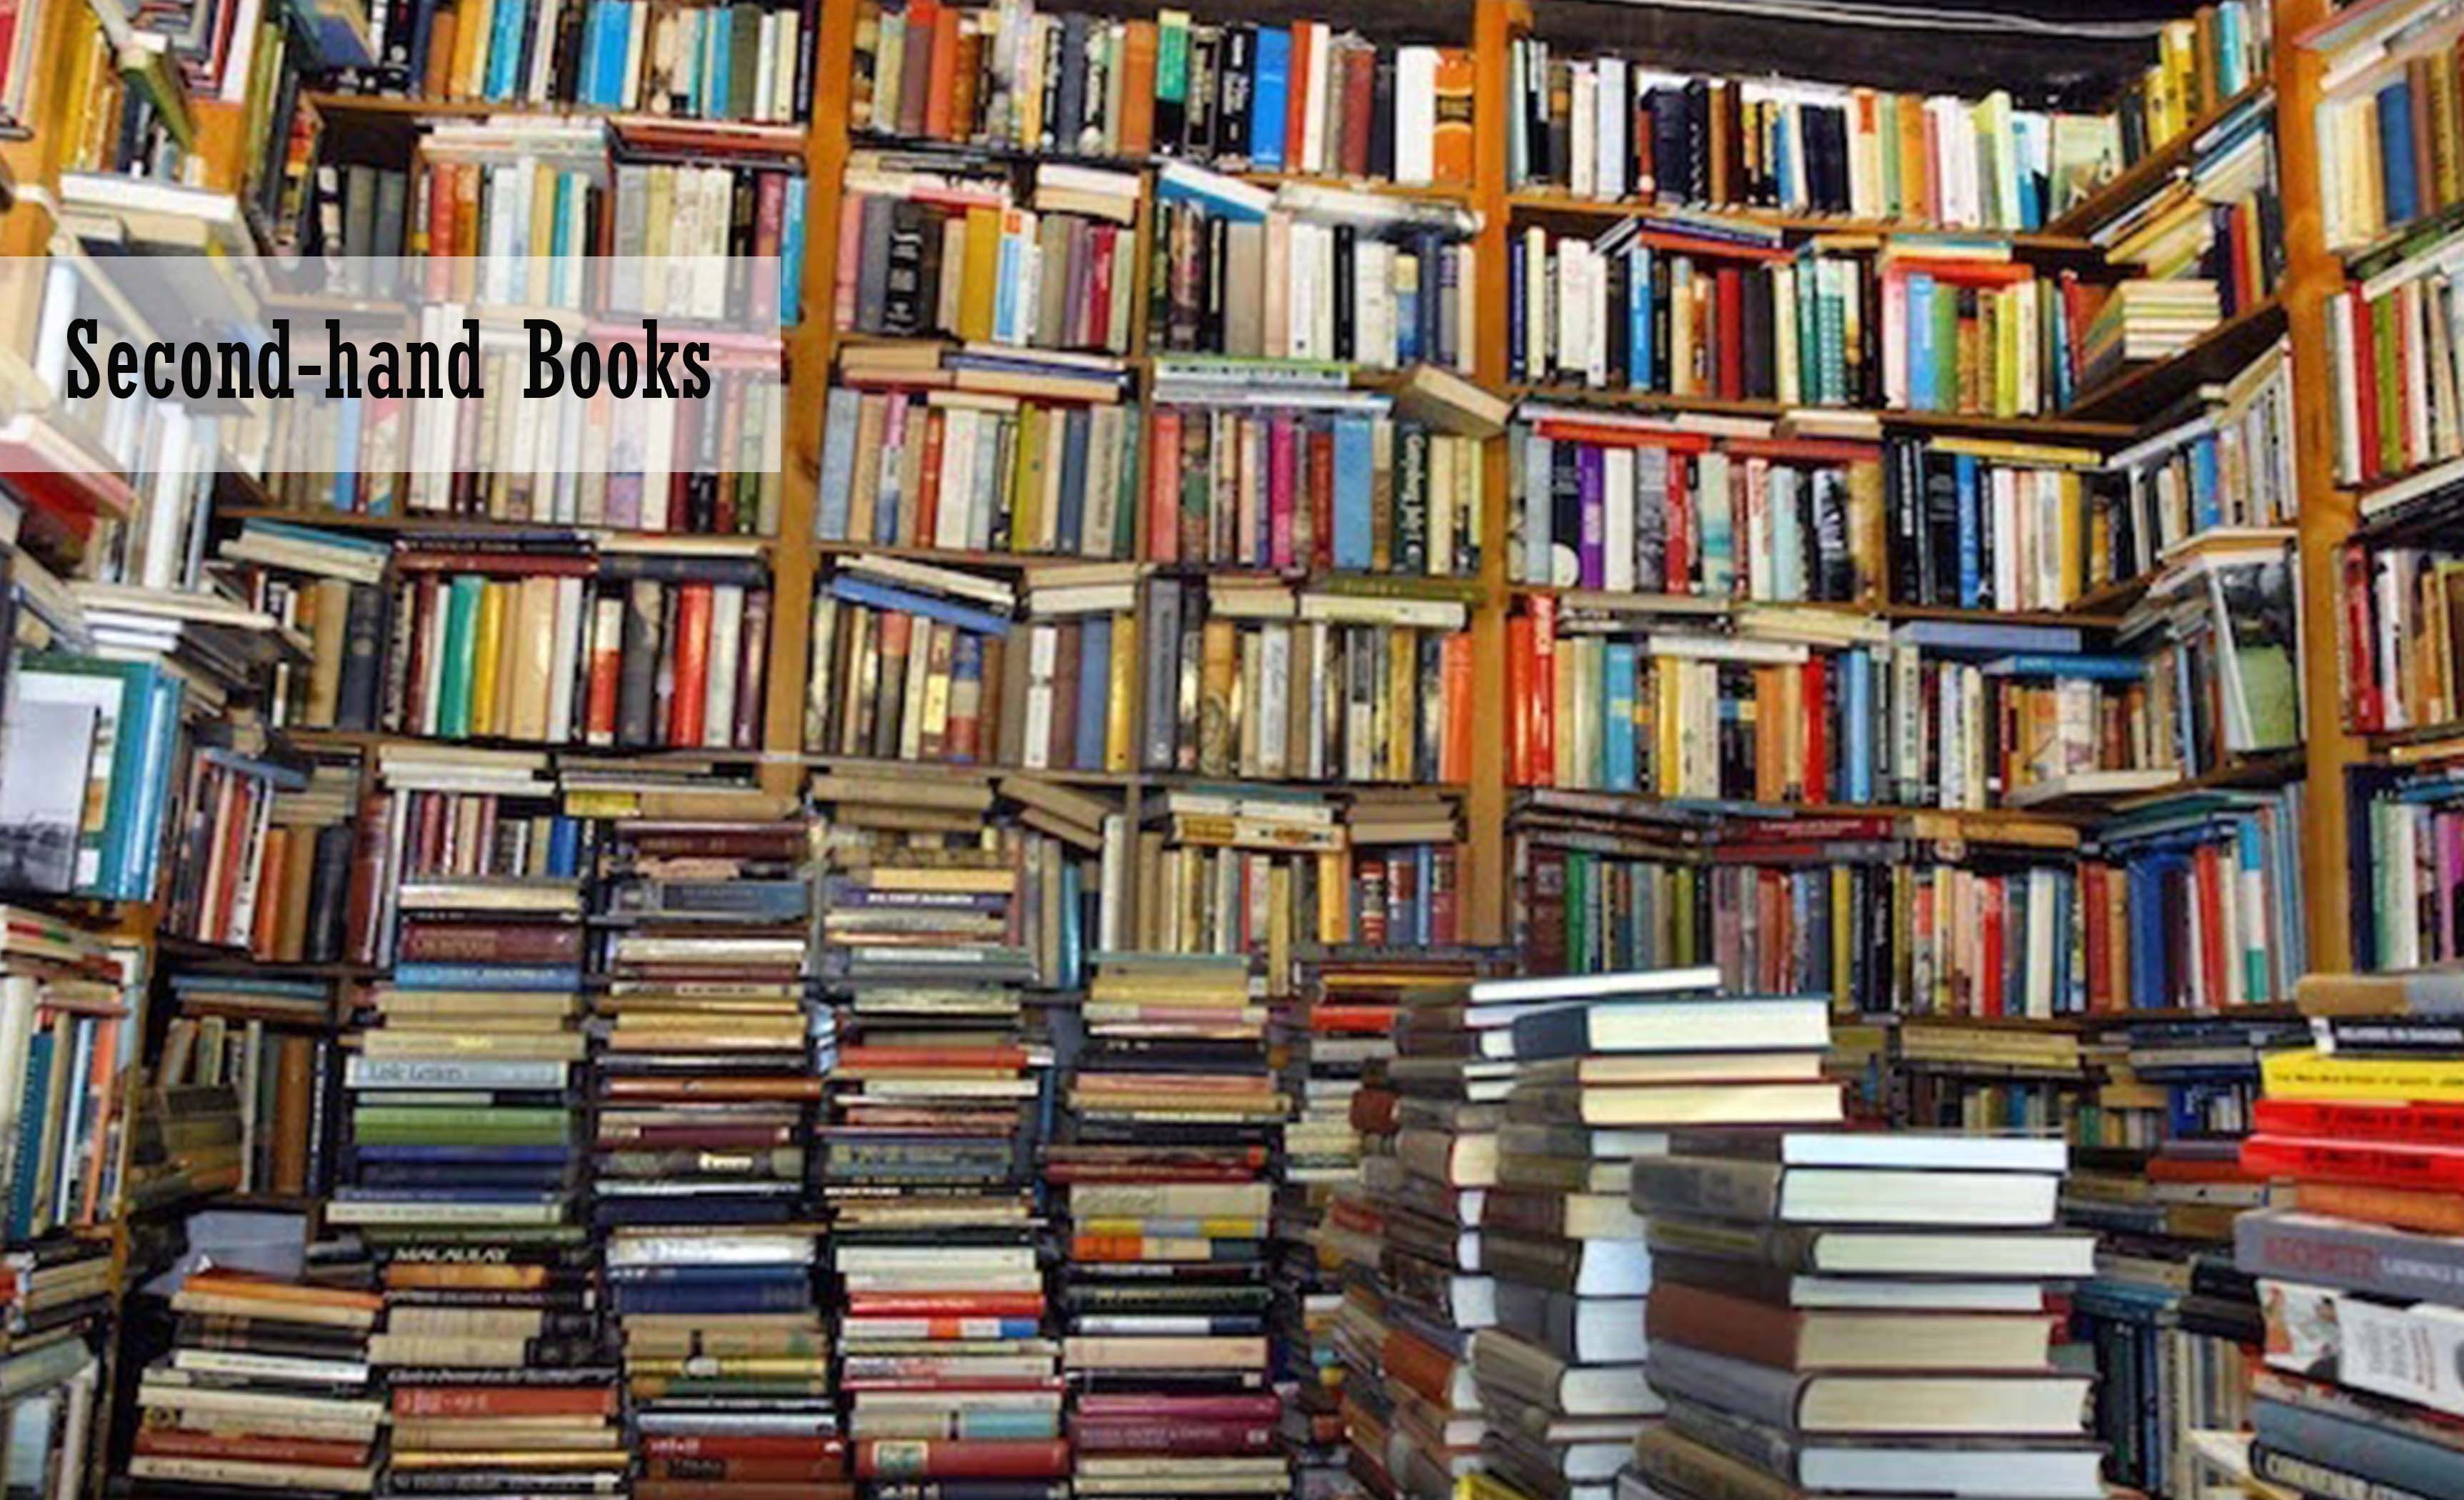 Second-hand Books - Secondhand Books Online